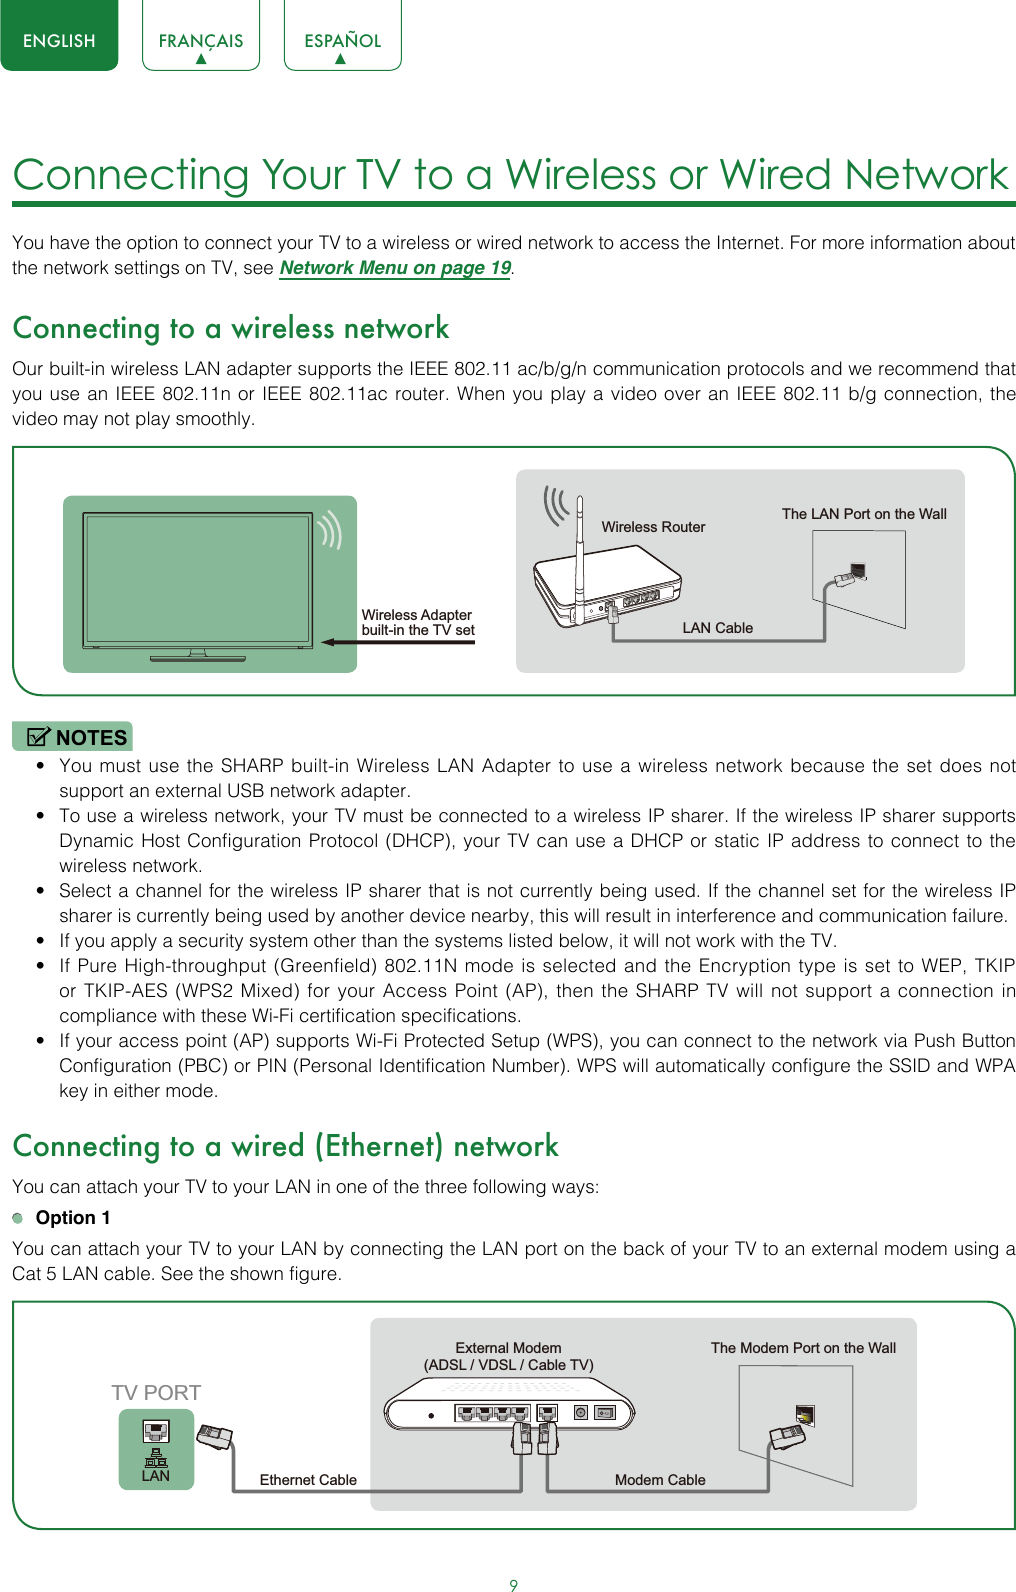 ENGLISH FRANÇAIS ESPAÑOL9Connecting Your TV to a Wireless or Wired Network You have the option to connect your TV to a wireless or wired network to access the Internet. For more information about the network settings on TV, see Network Menu on page 19.Connecting to a wireless networkOur built-in wireless LAN adapter supports the IEEE 802.11 ac/b/g/n communication protocols and we recommend that you use an IEEE 802.11n or IEEE 802.11ac router. When you play a video over an IEEE 802.11 b/g connection, the video may not play smoothly.NOTES• You must use the SHARP built-in Wireless LAN Adapter to use a wireless network because the set does not support an external USB network adapter.• To use a wireless network, your TV must be connected to a wireless IP sharer. If the wireless IP sharer supports Dynamic Host Configuration Protocol (DHCP), your TV can use a DHCP or static IP address to connect to the wireless network.• Select a channel for the wireless IP sharer that is not currently being used. If the channel set for the wireless IP sharer is currently being used by another device nearby, this will result in interference and communication failure.• If you apply a security system other than the systems listed below, it will not work with the TV.• If Pure High-throughput (Greenfield) 802.11N mode is selected and the Encryption type is set to WEP, TKIP or TKIP-AES (WPS2 Mixed) for your Access Point (AP), then the SHARP TV will not support a connection in compliance with these Wi-Fi certification specifications.• If your access point (AP) supports Wi-Fi Protected Setup (WPS), you can connect to the network via Push Button Configuration (PBC) or PIN (Personal Identification Number). WPS will automatically configure the SSID and WPA key in either mode.Connecting to a wired (Ethernet) networkYou can attach your TV to your LAN in one of the three following ways: Option 1You can attach your TV to your LAN by connecting the LAN port on the back of your TV to an external modem using a Cat 5 LAN cable. See the shown figure. Wireless Adapterbuilt-in the TV set  LAN CableWireless Router The LAN Port on the WallExternal Modem(ADSL / VDSL / Cable TV)  The Modem Port on the WallEthernet Cable  Modem Cable LANTV PORT